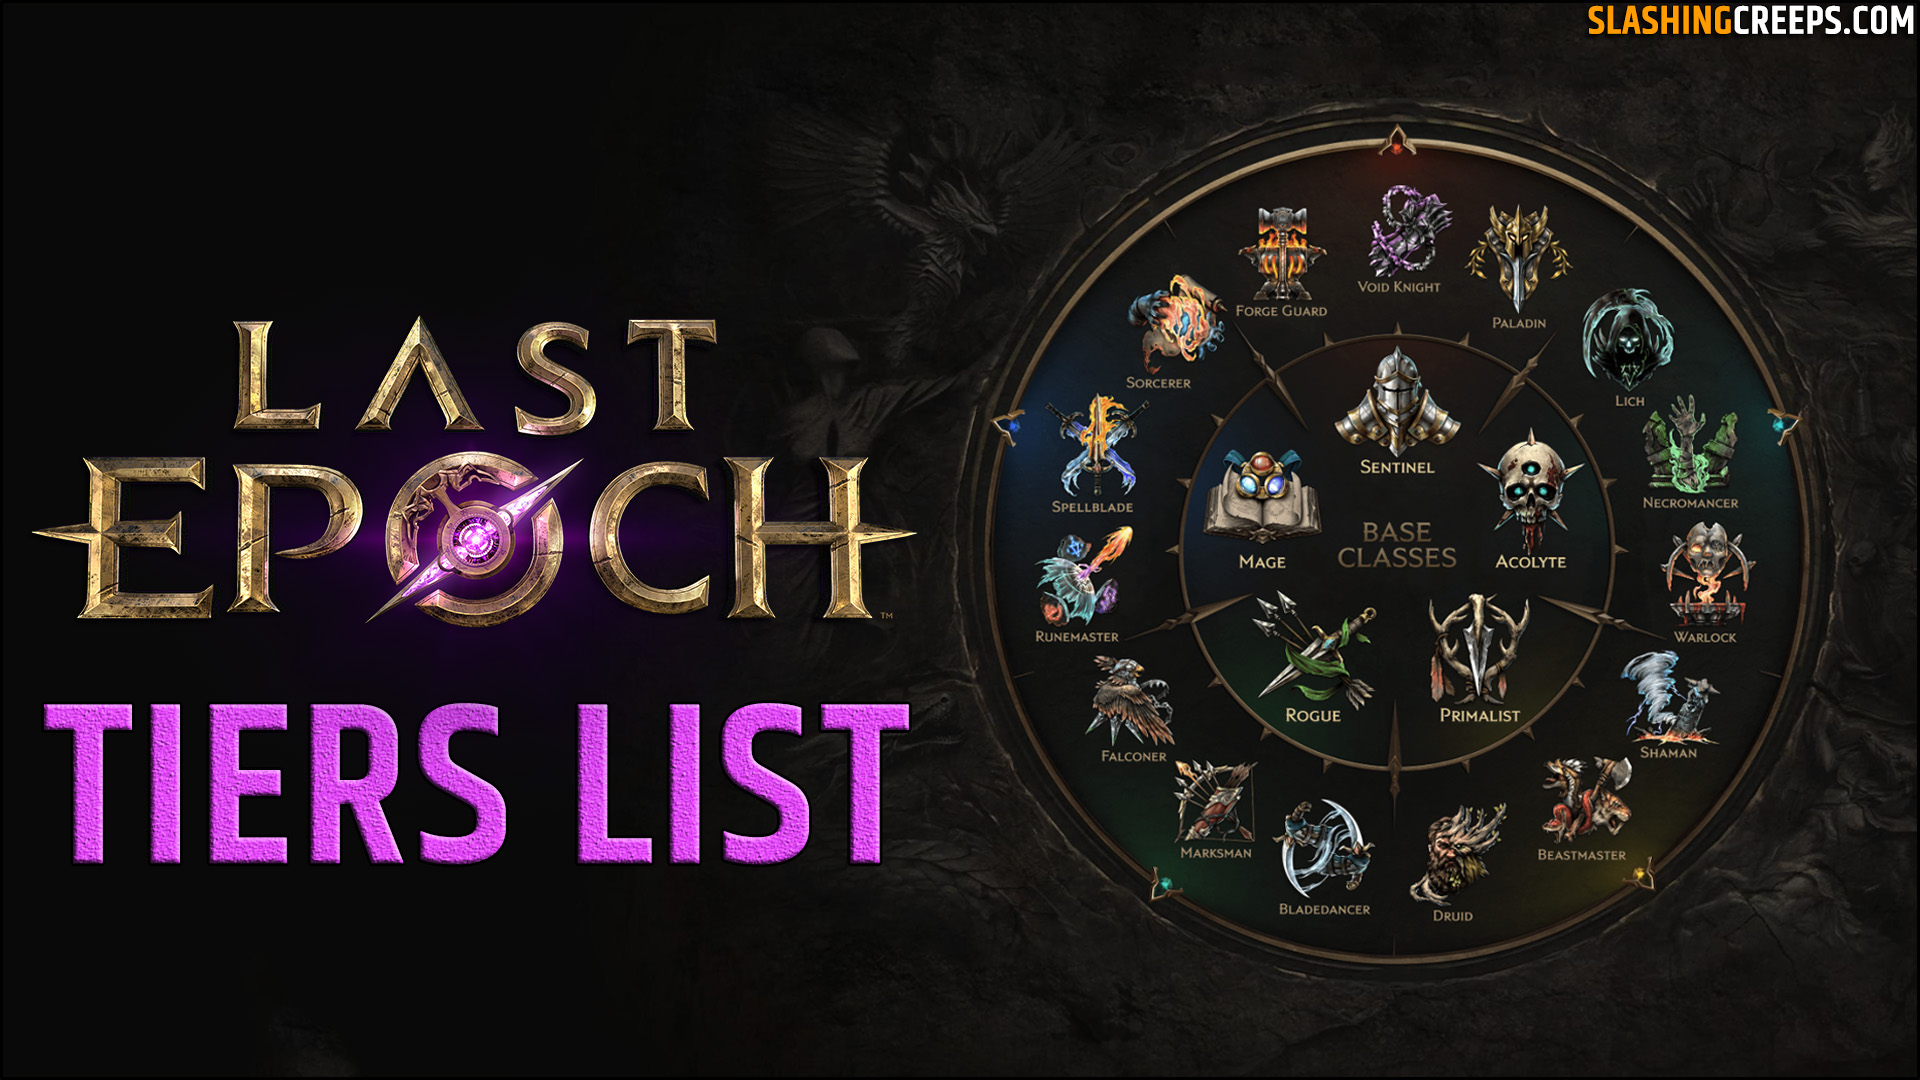 Tiers List Last Epoch 1.0, all class builds for the release of the game